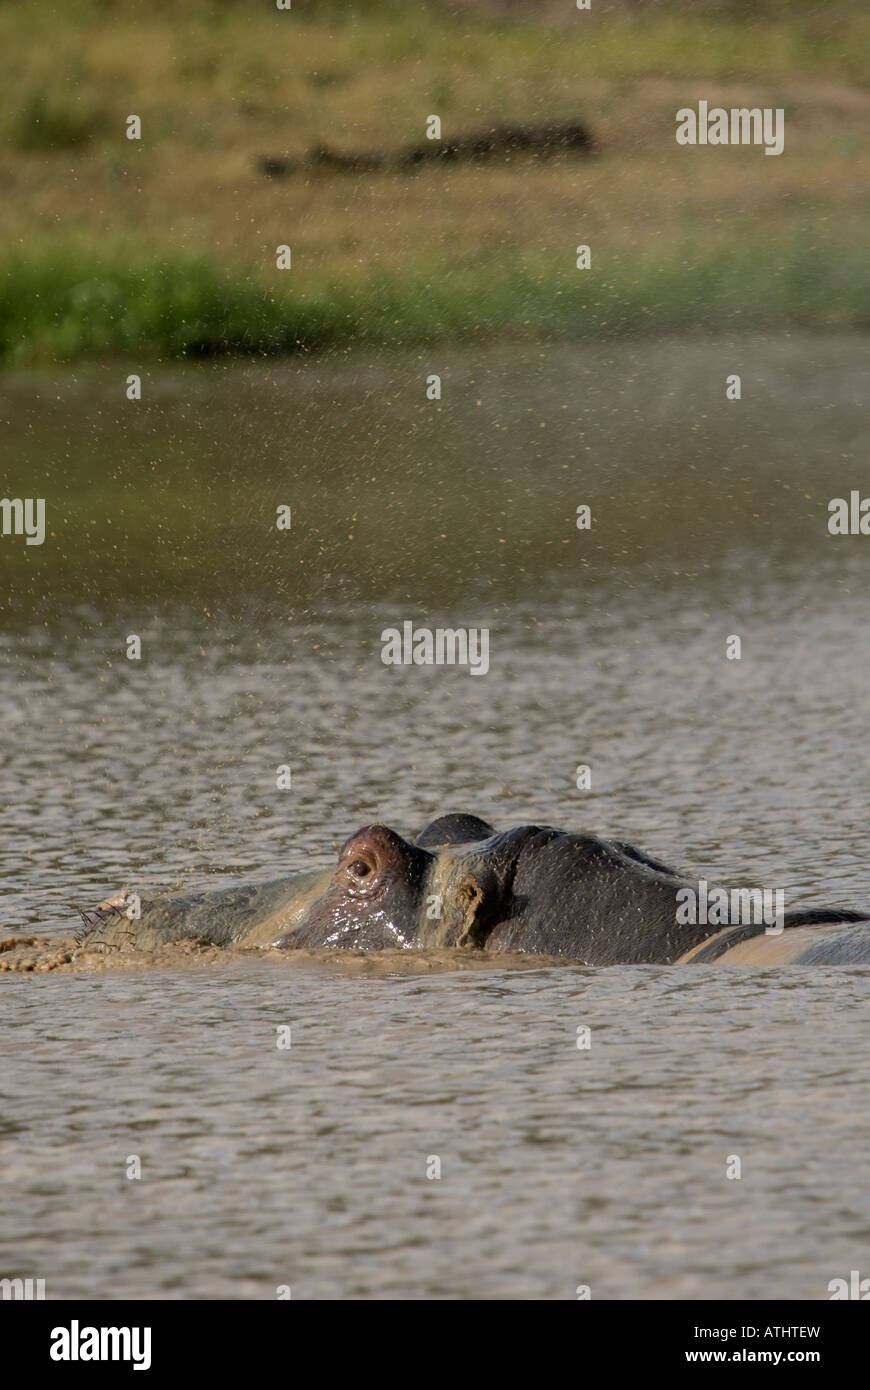 A hippo sprays a fine mist of water into the air as it emerges Stock Photo